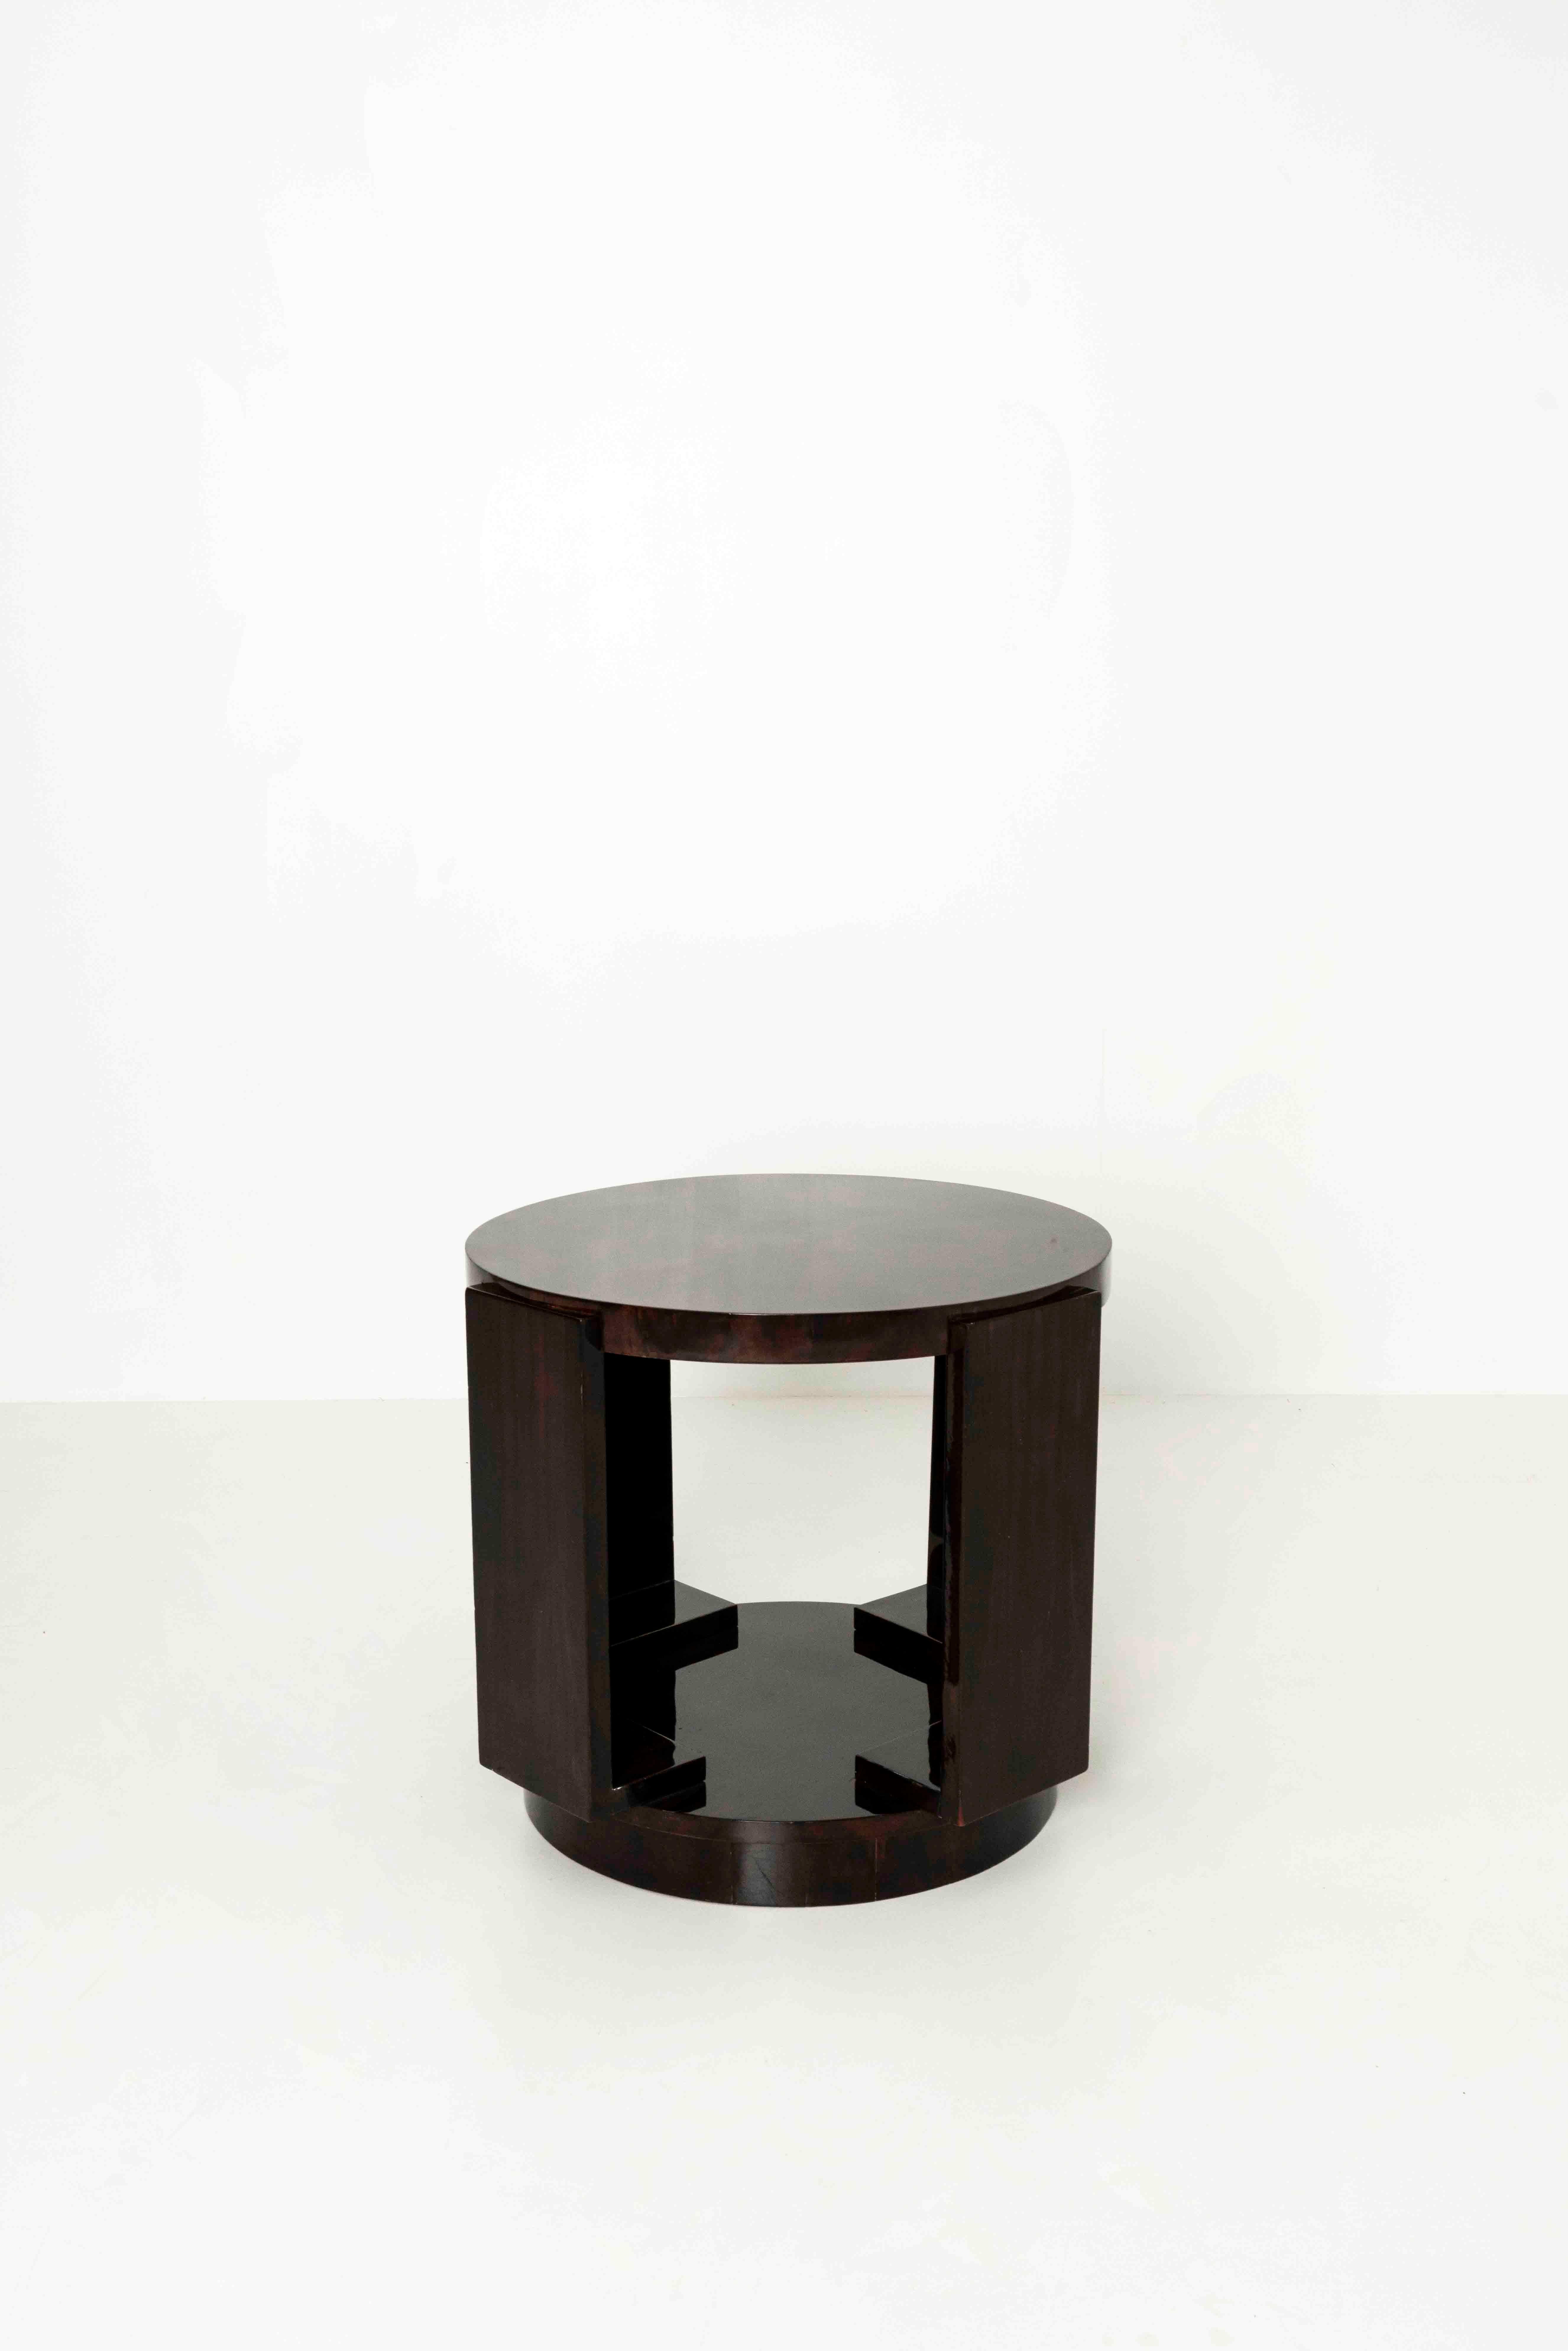 Nice dark brown lacquered Art Deco coffee table from France, the 1930s. This round coffee table has a nice design with four legs leading from top to bottom with very visible connections. The table is in good condition with normal wear and tear due